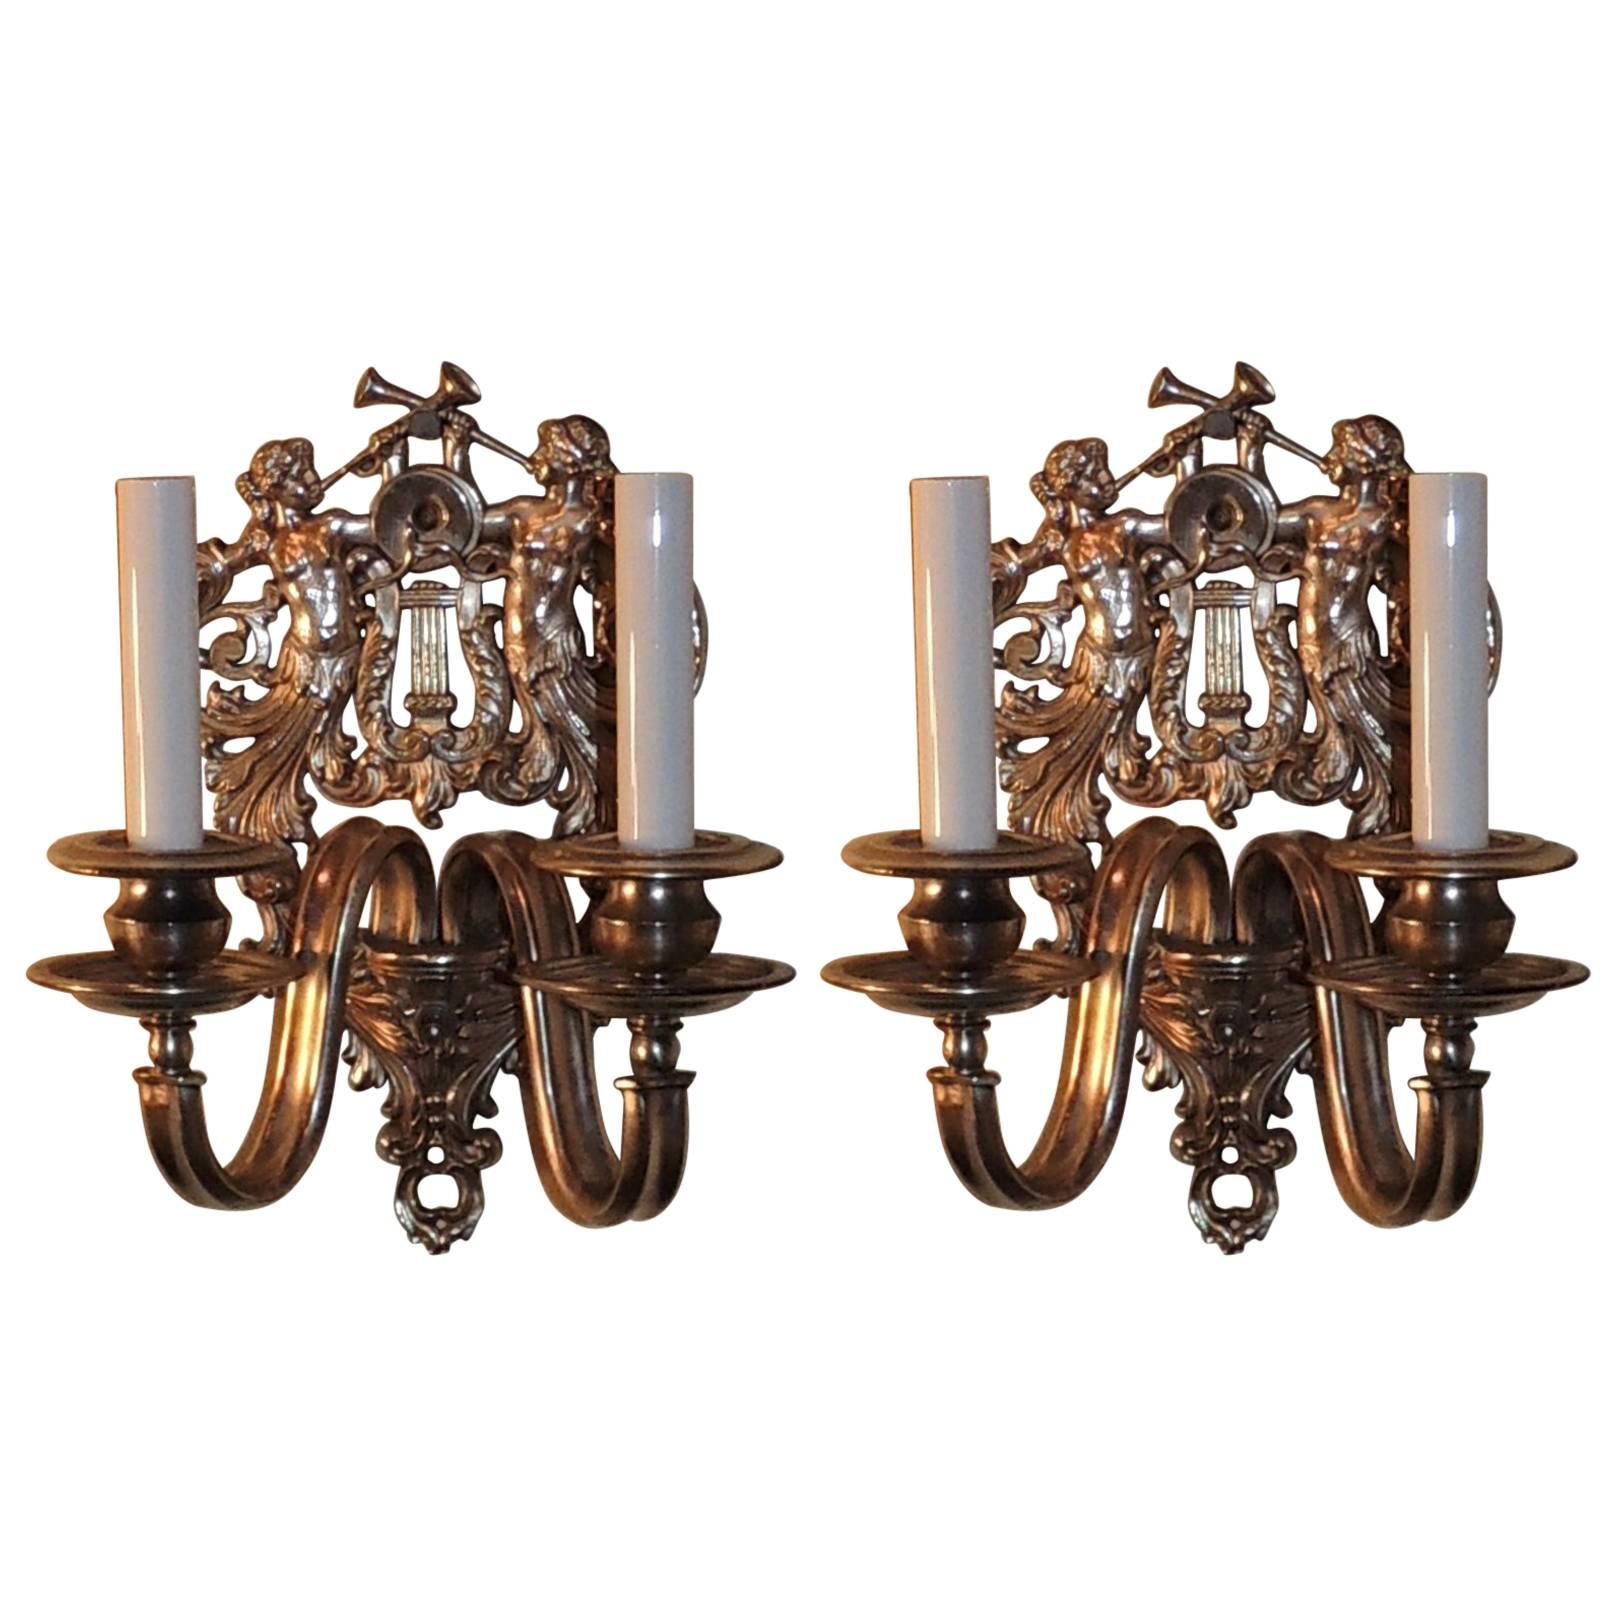 Wonderful Pair of Two-Light Silvered Bronze Figural Trumpets Caldwell Sconces